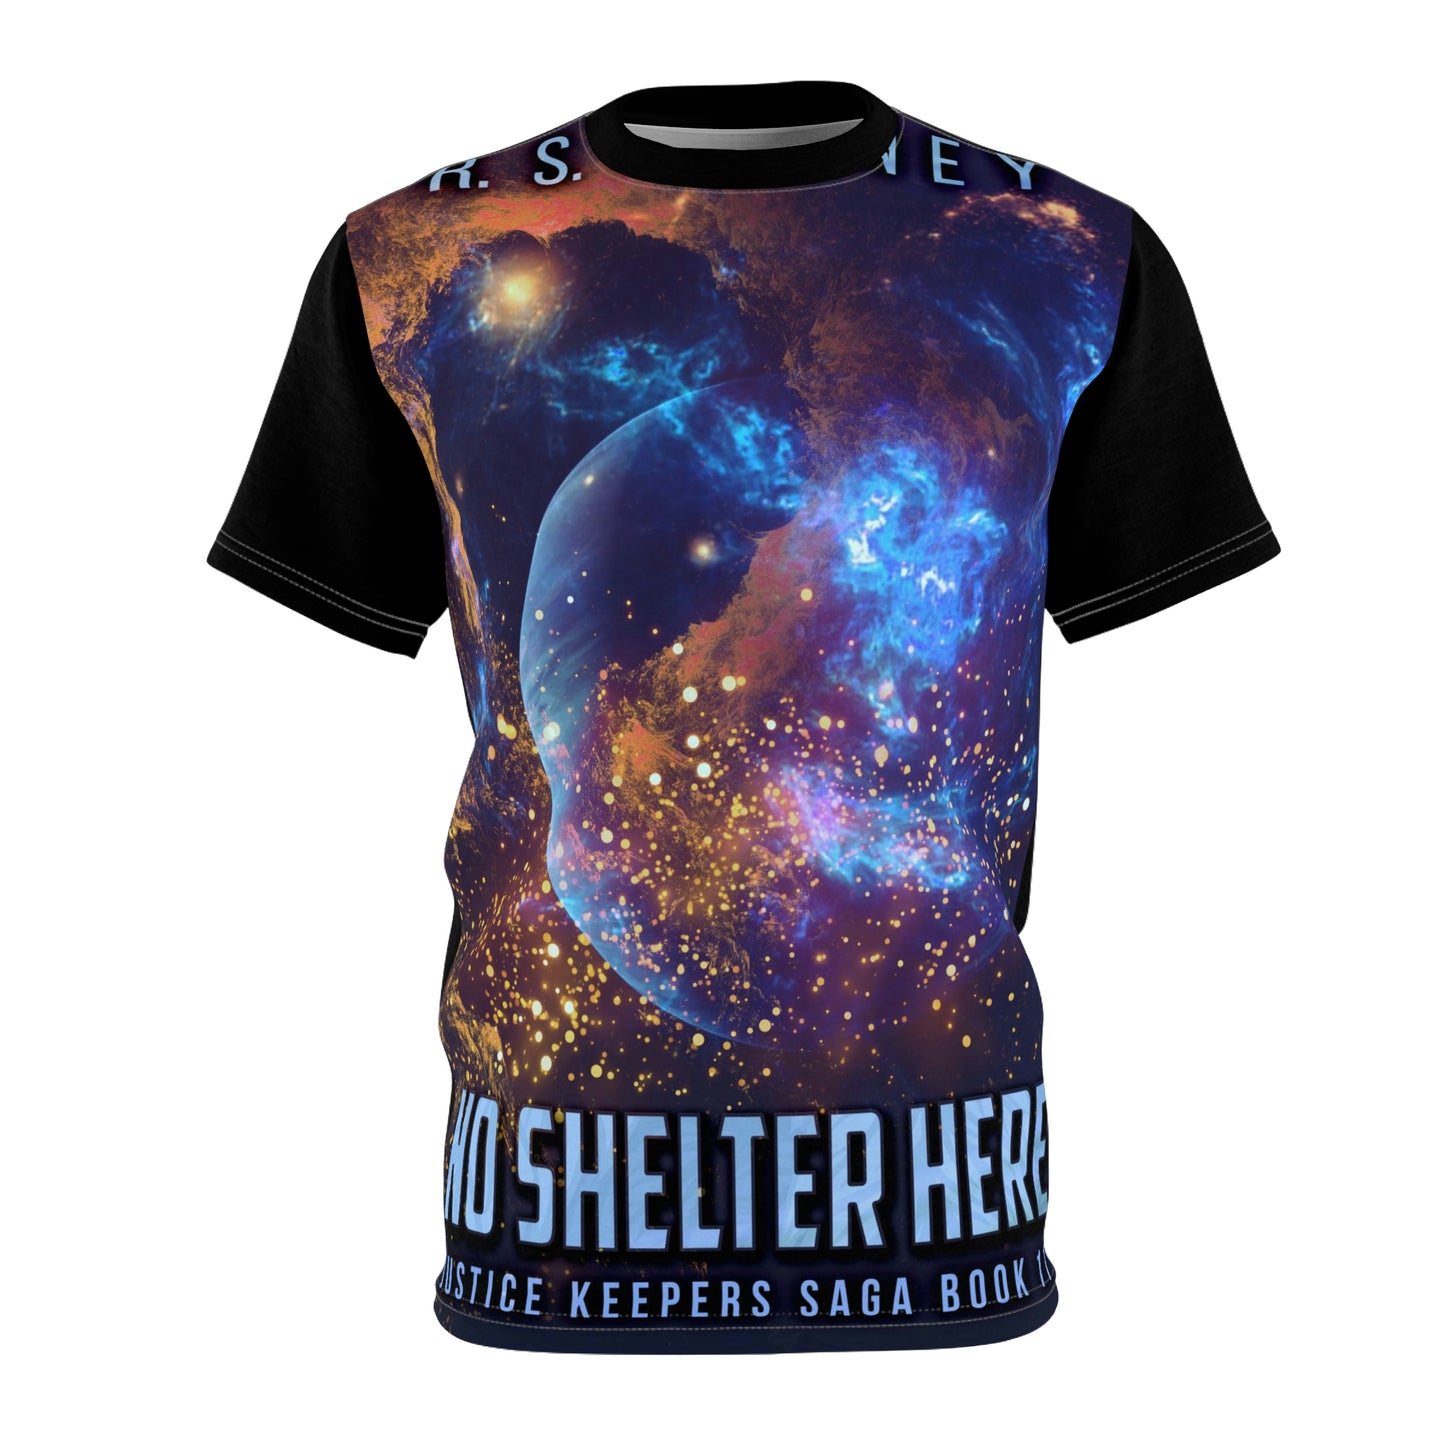 No Shelter Here - Unisex All-Over Print Cut & Sew T-Shirt